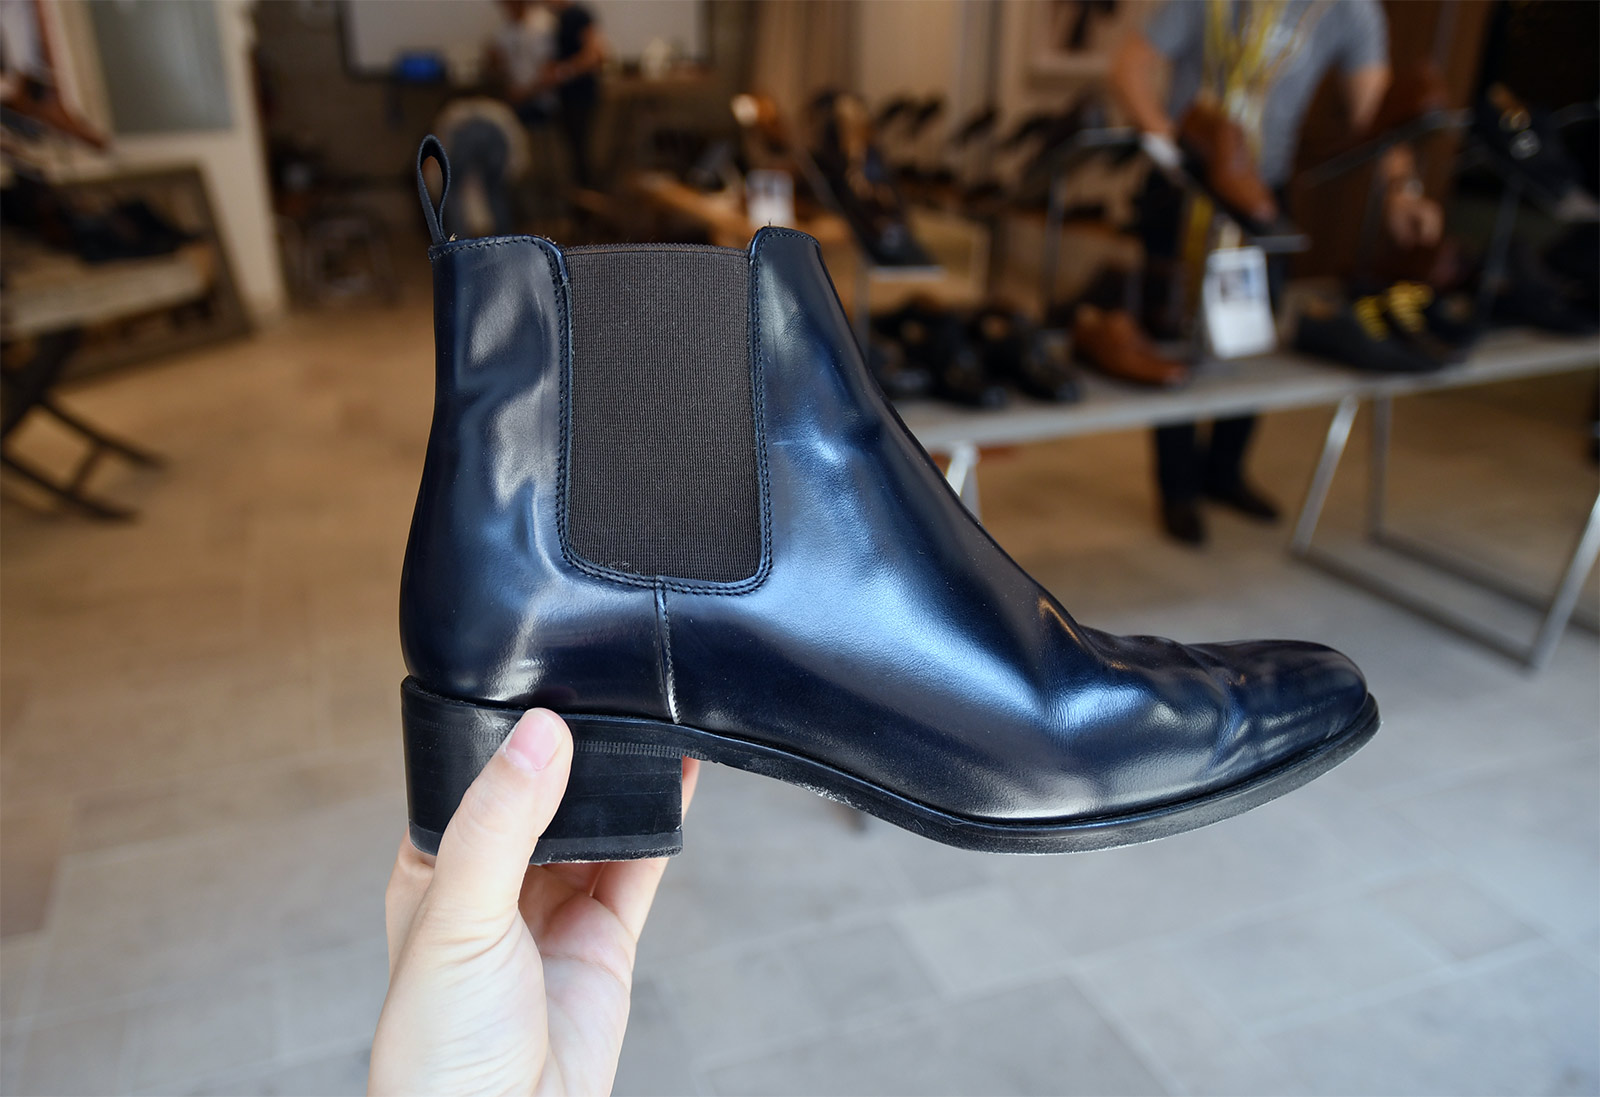 Made in Spain, Qüero Shoes Land in NYC - COOL HUNTING®